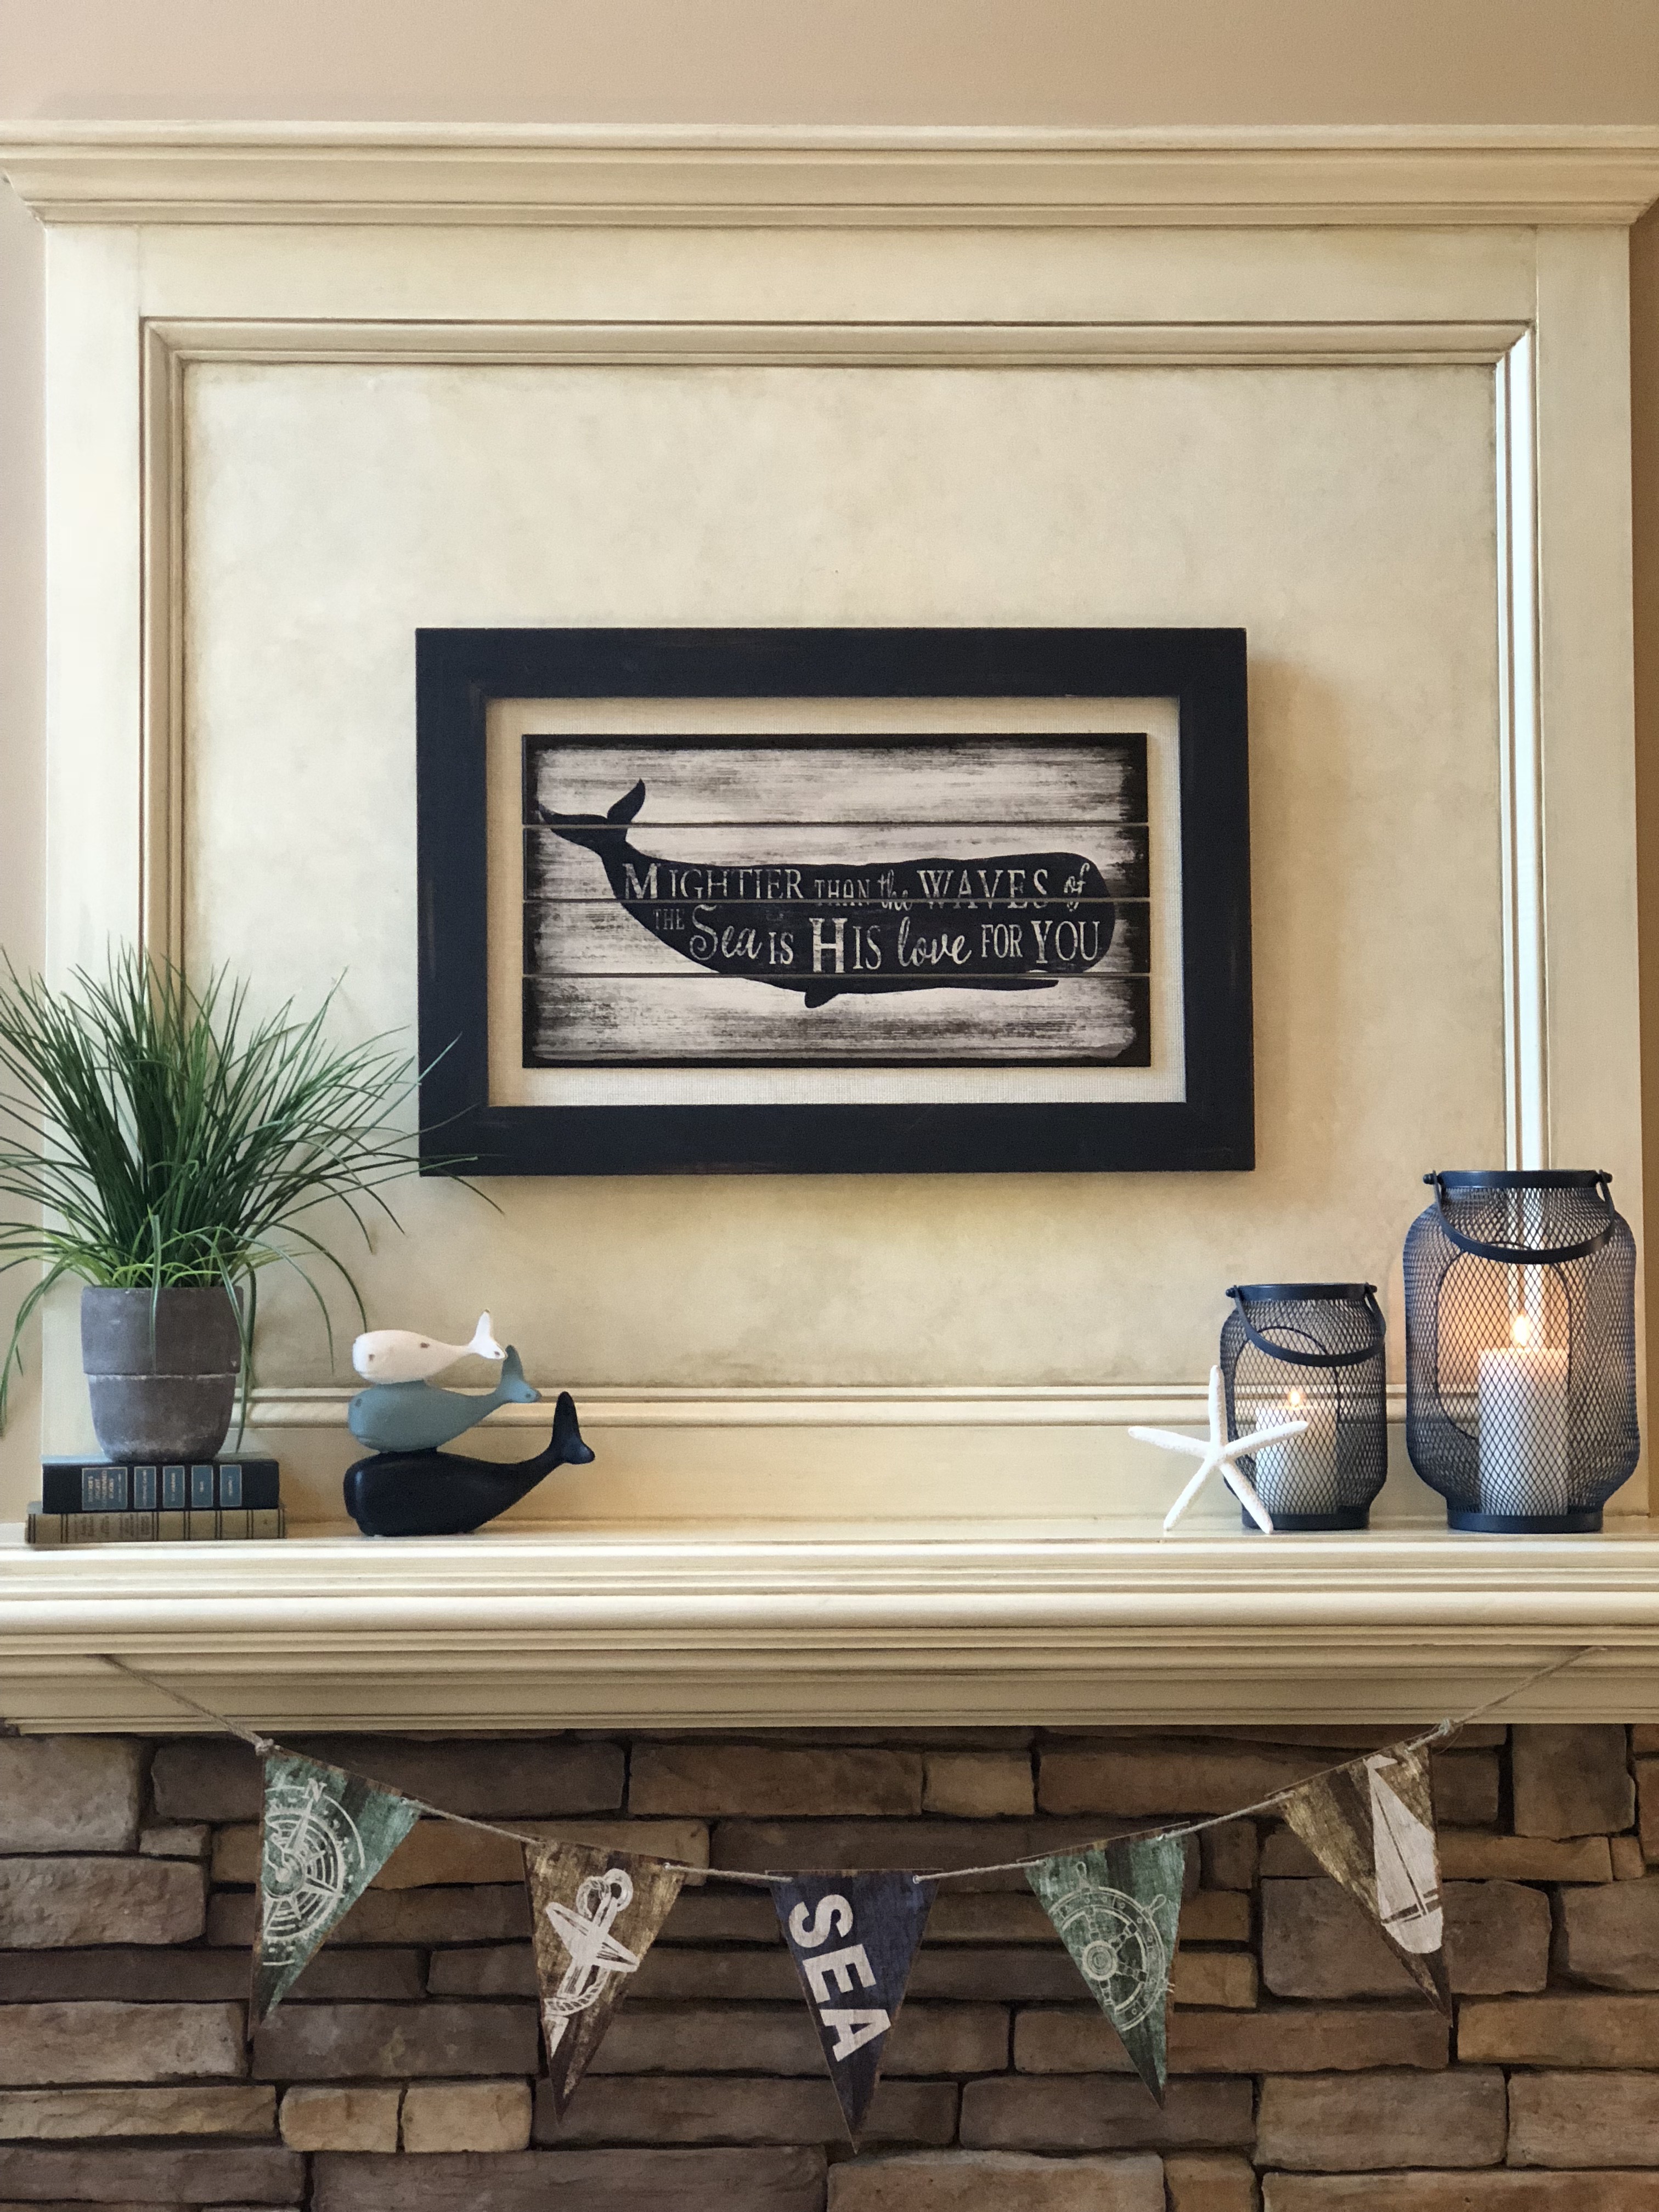 Coastal Mantel – Mightier than the waves of the sea is His love for you